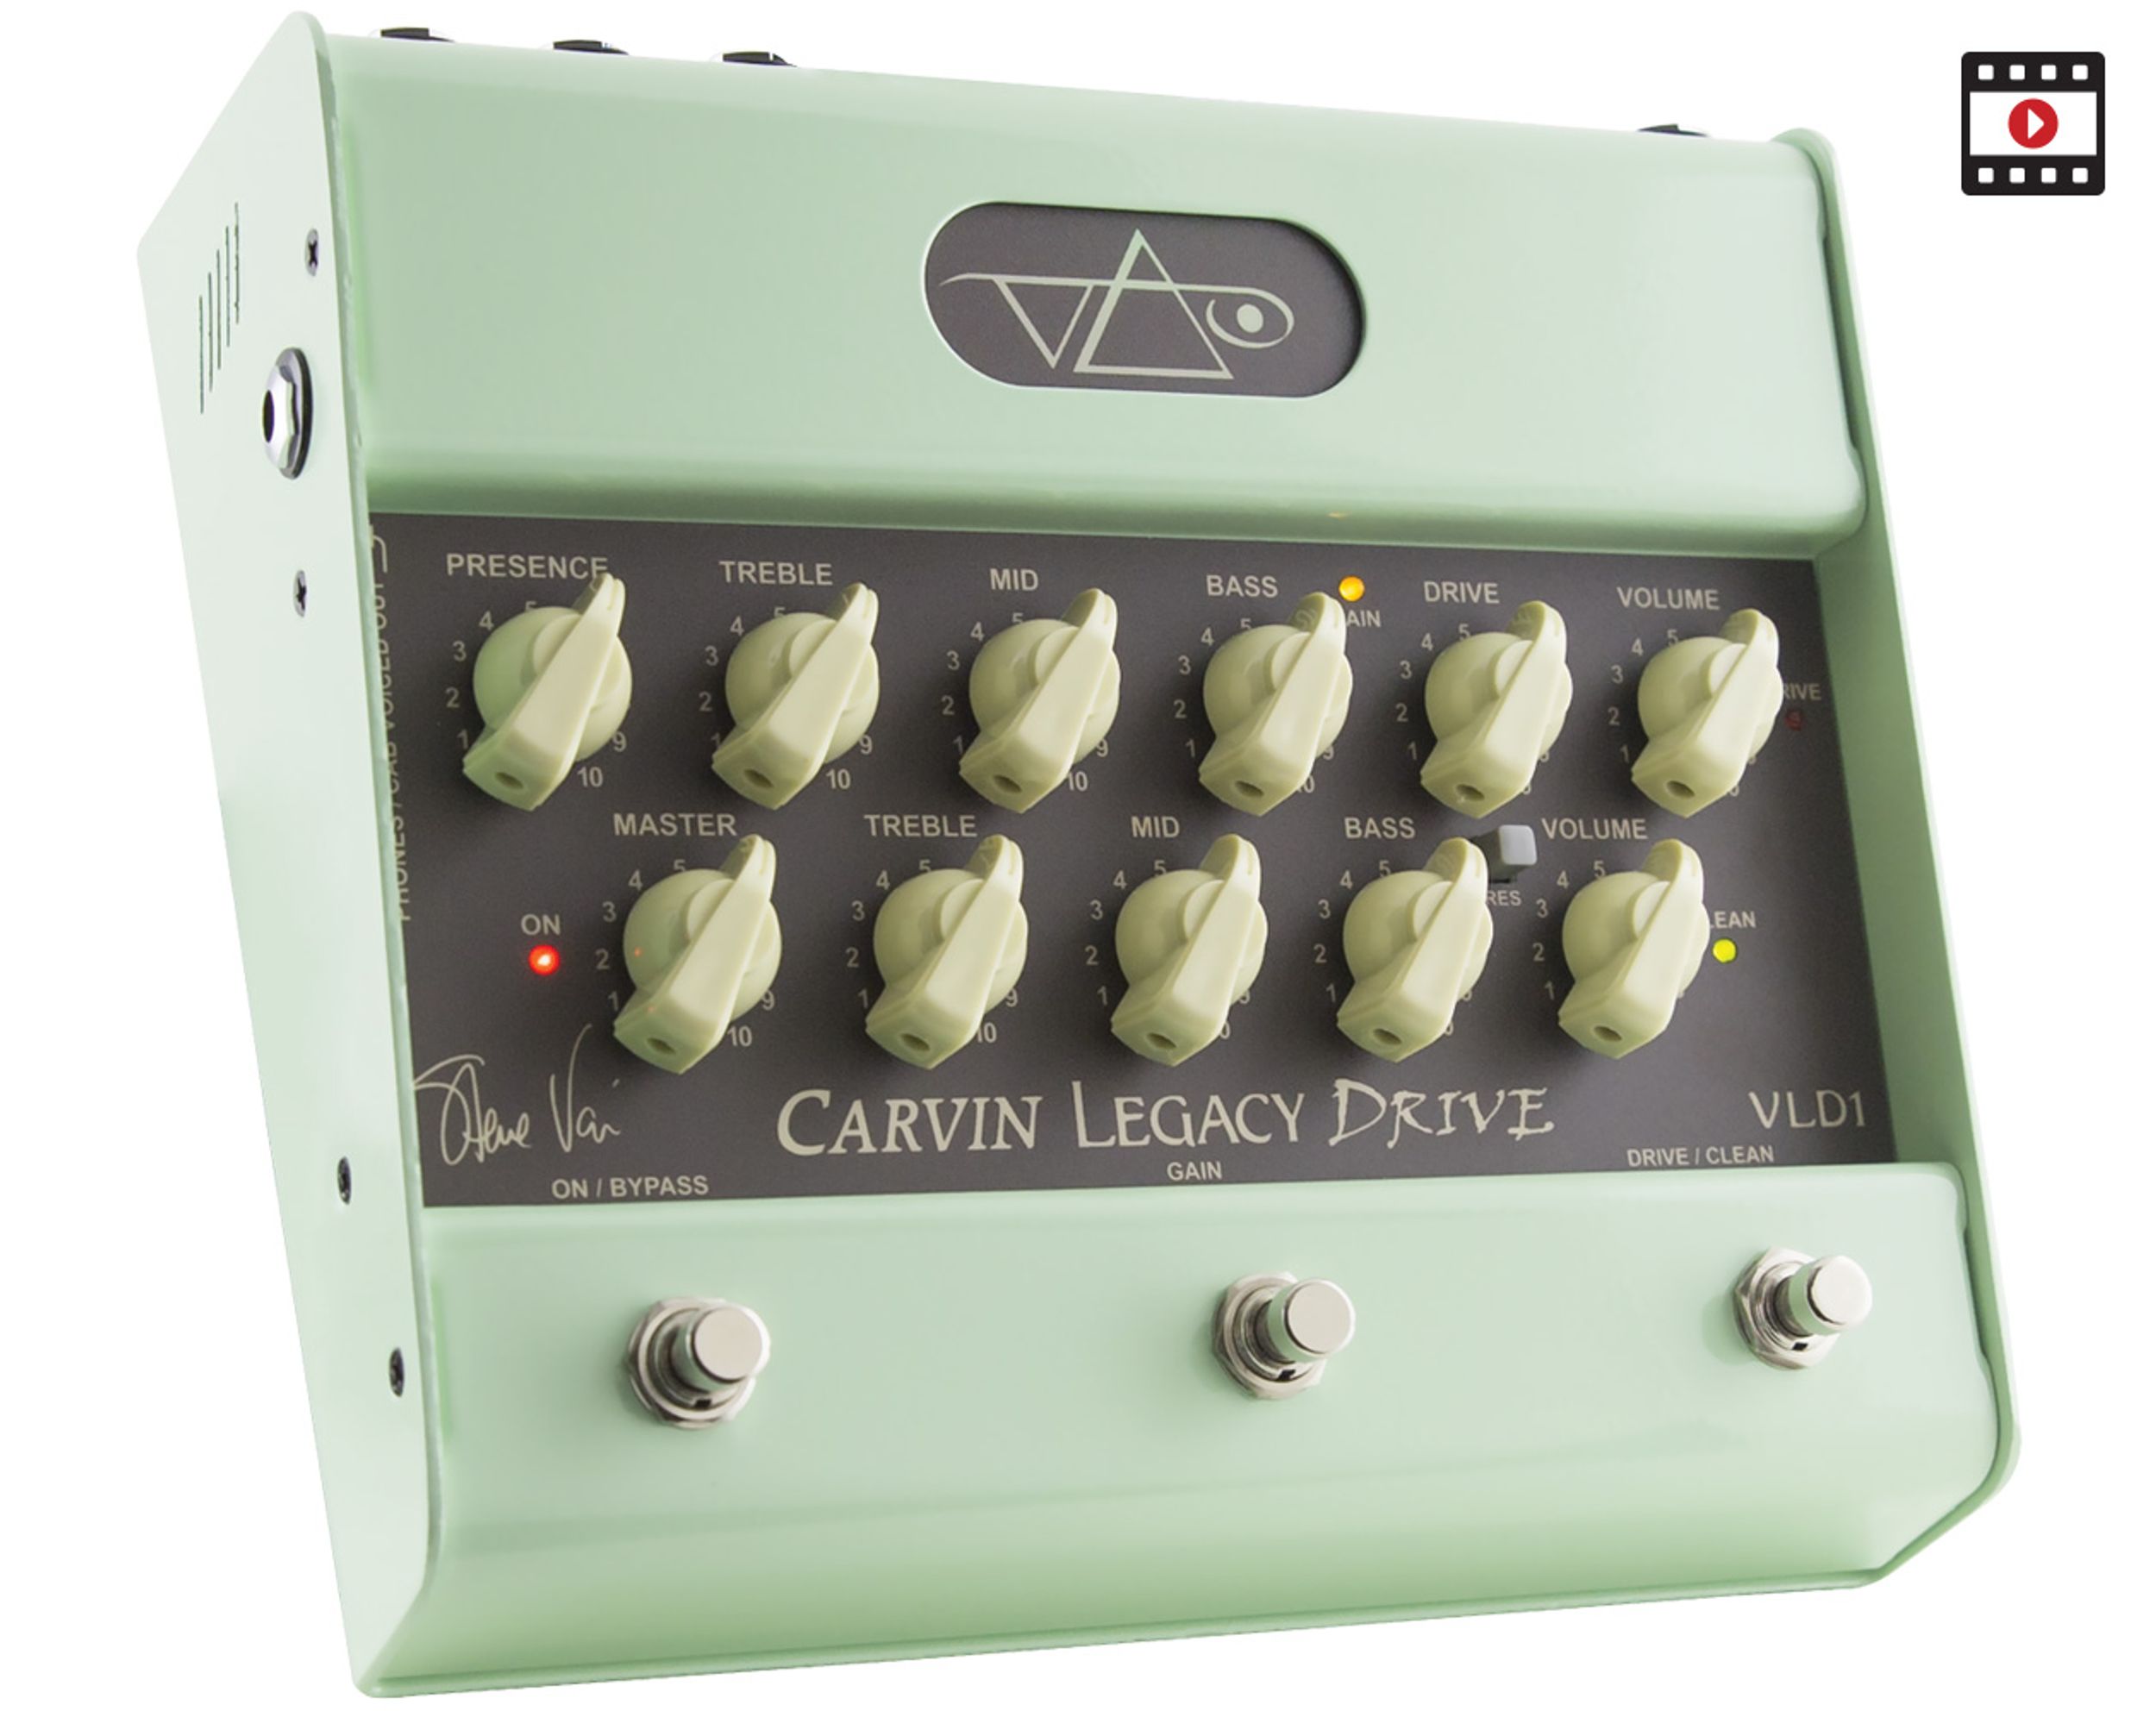 Carvin VLD1 Legacy Drive Review